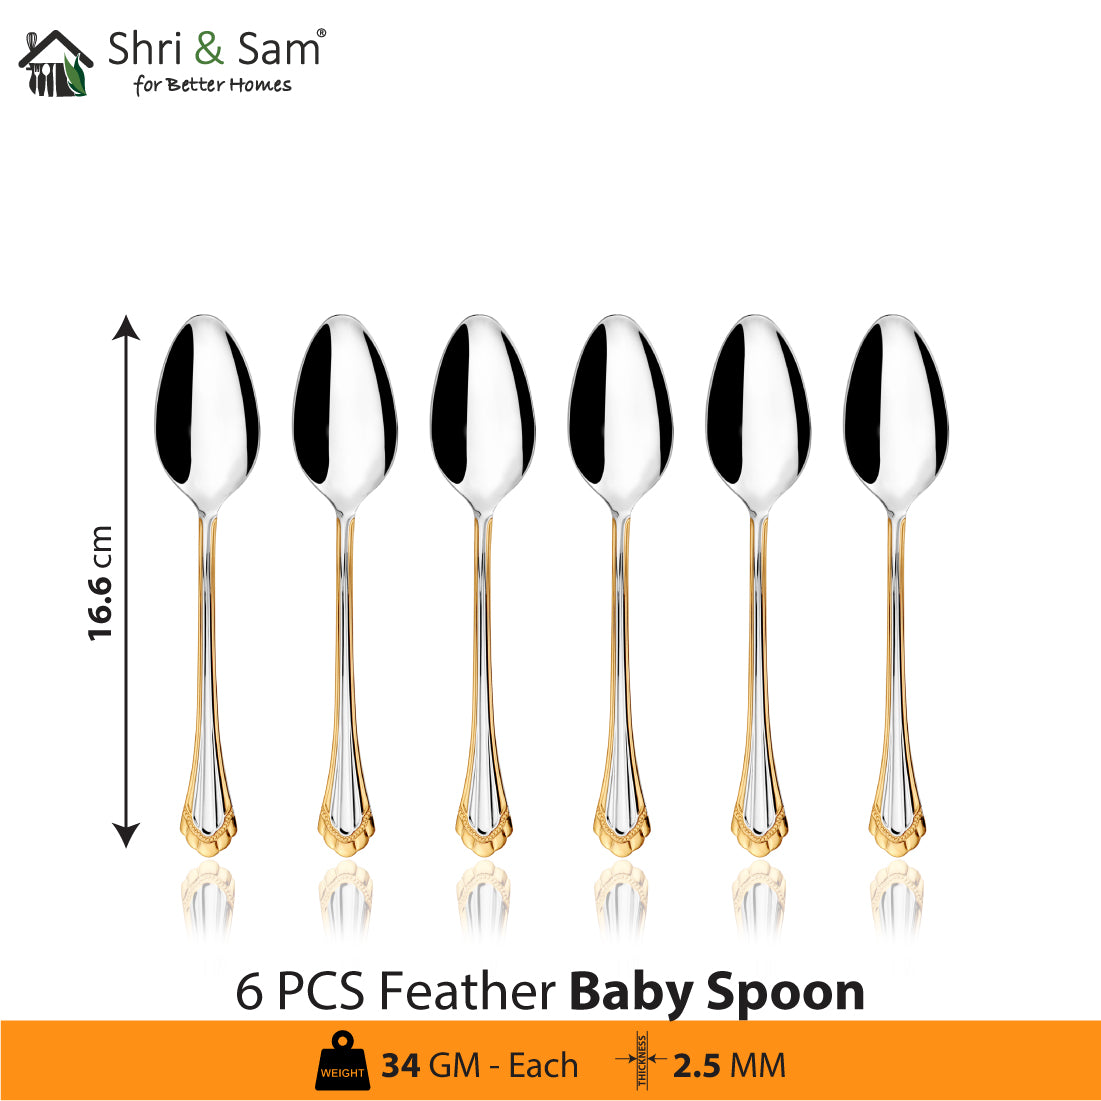 Stainless Steel Cutlery Feather